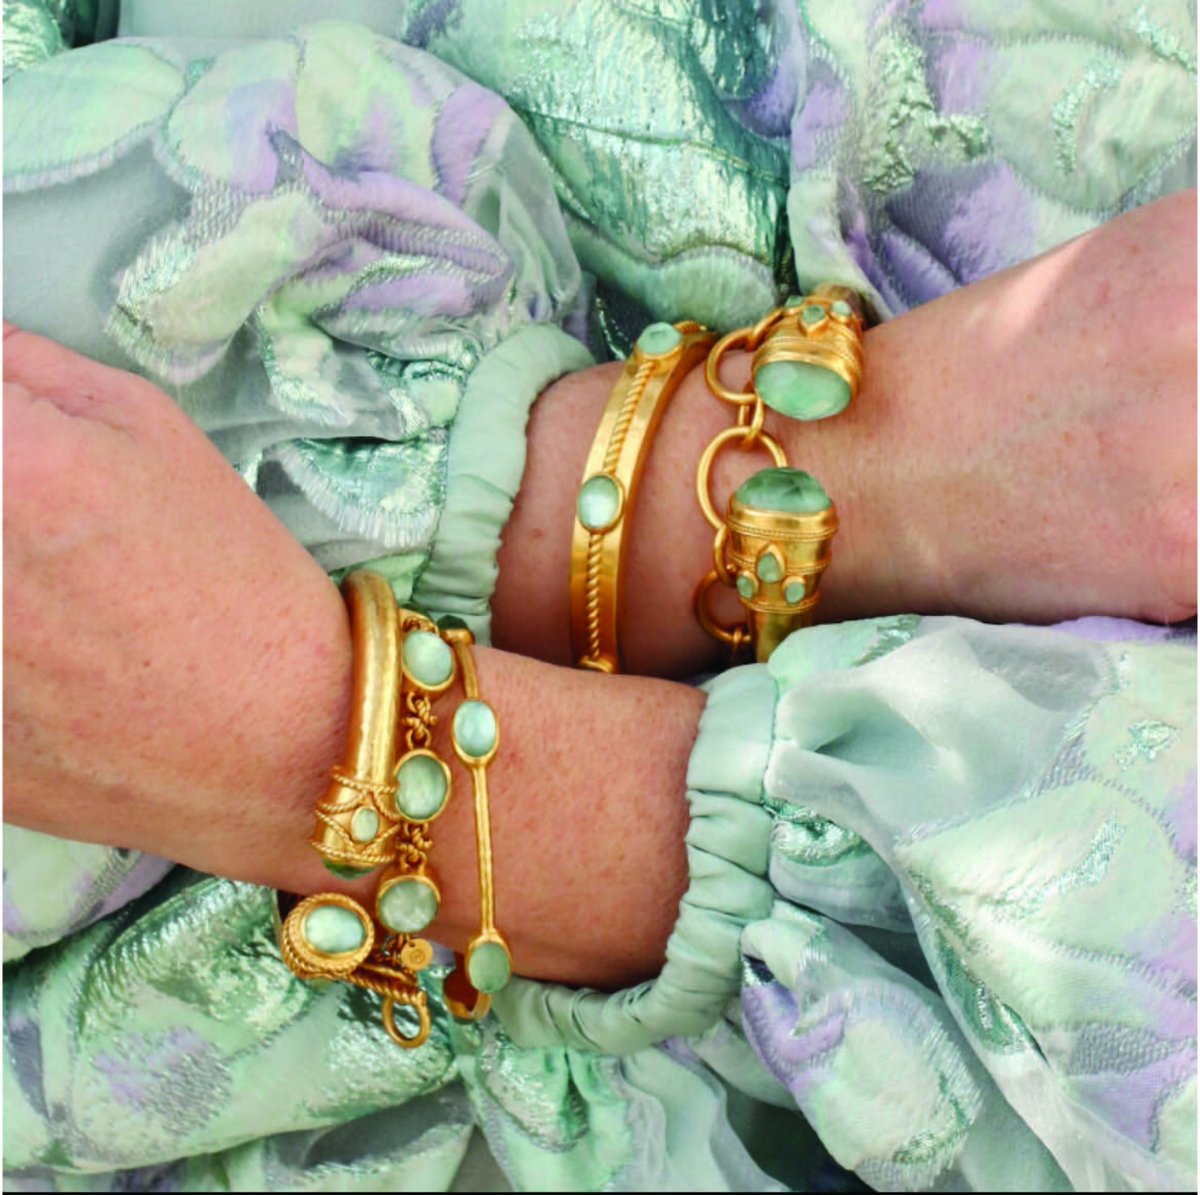 Spring #Armparty in the newest hue, aquamarine blue by #JulieVos at #AlexandersJwlrs ✨

#Armparty #SpringCollection #StatementJewelry #SpringJewelry #SpringColors